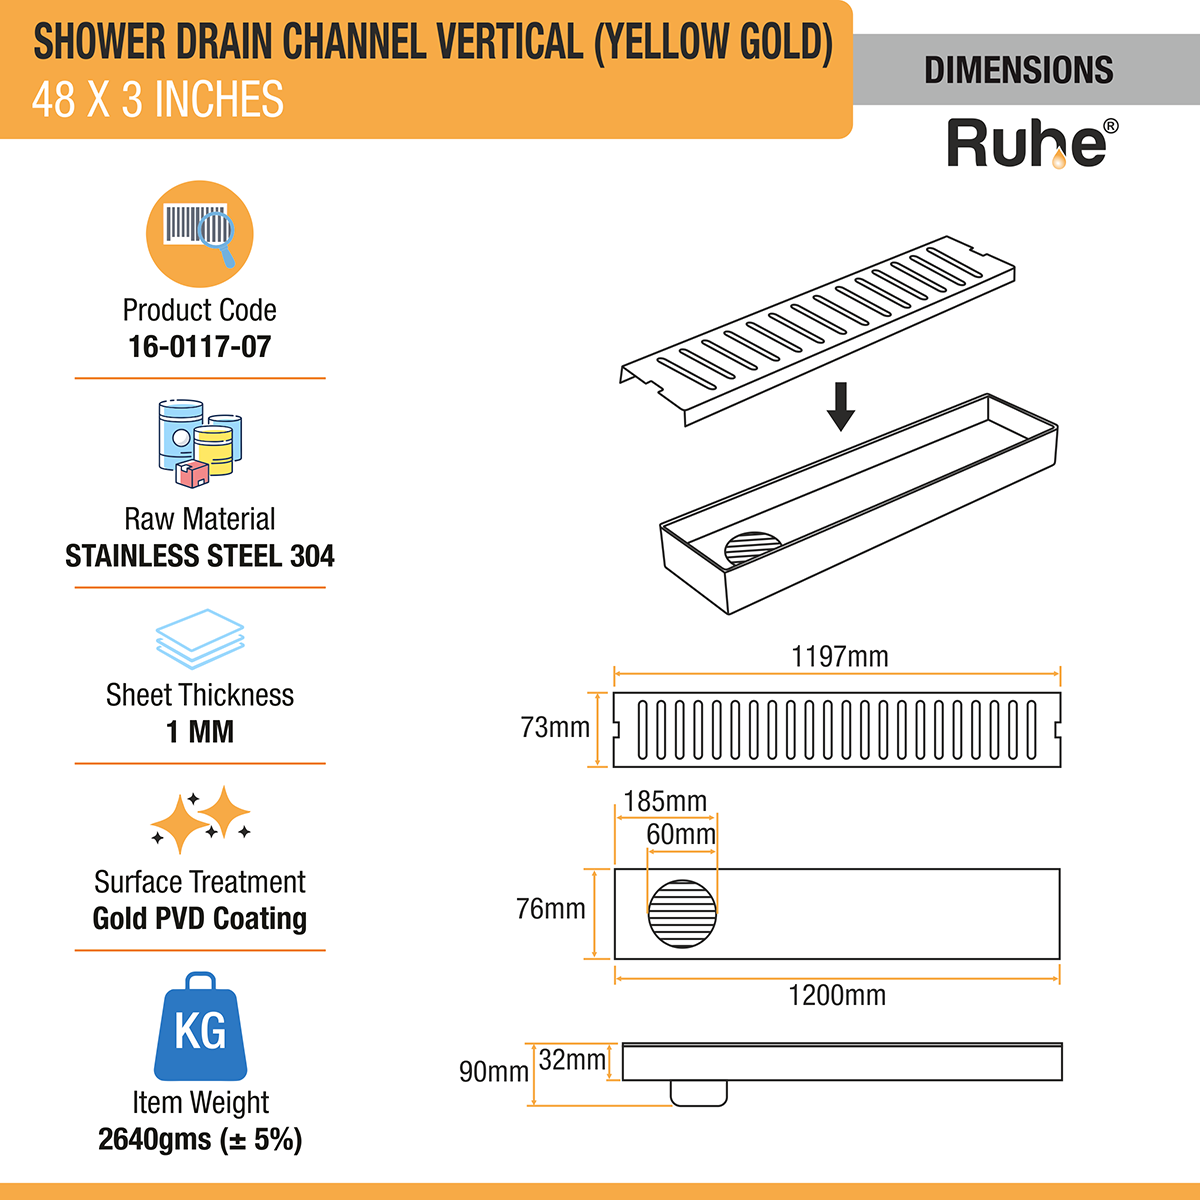 Vertical Shower Drain Channel (48 x 3 Inches) YELLOW GOLD dimensions and size